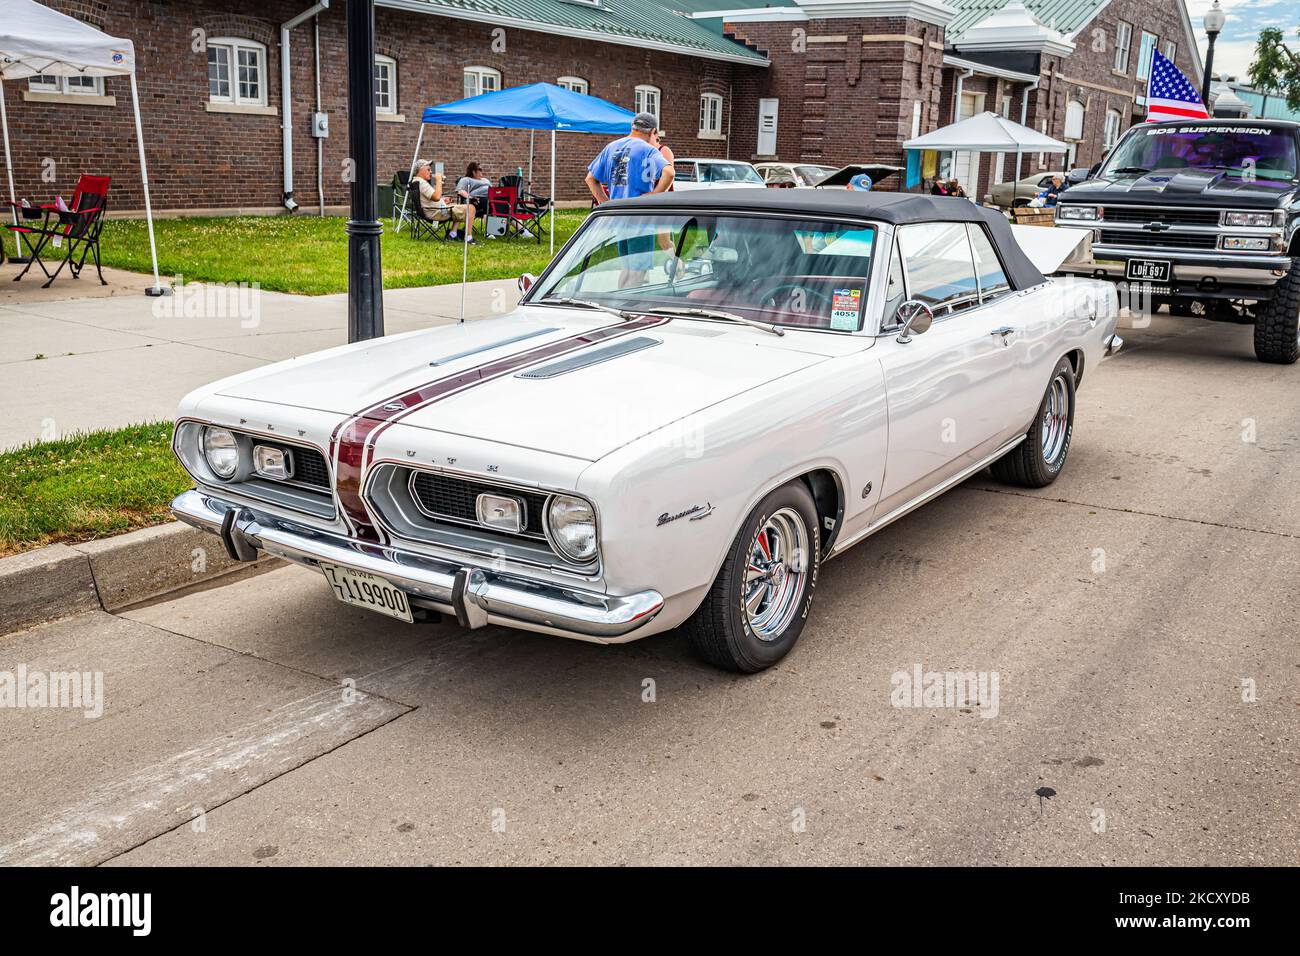 Des Moines, IA - July 01, 2022: High perspective front corner view of a 1967 Plymouth Barracuda Formula S Convertible at a local car show. Stock Photo